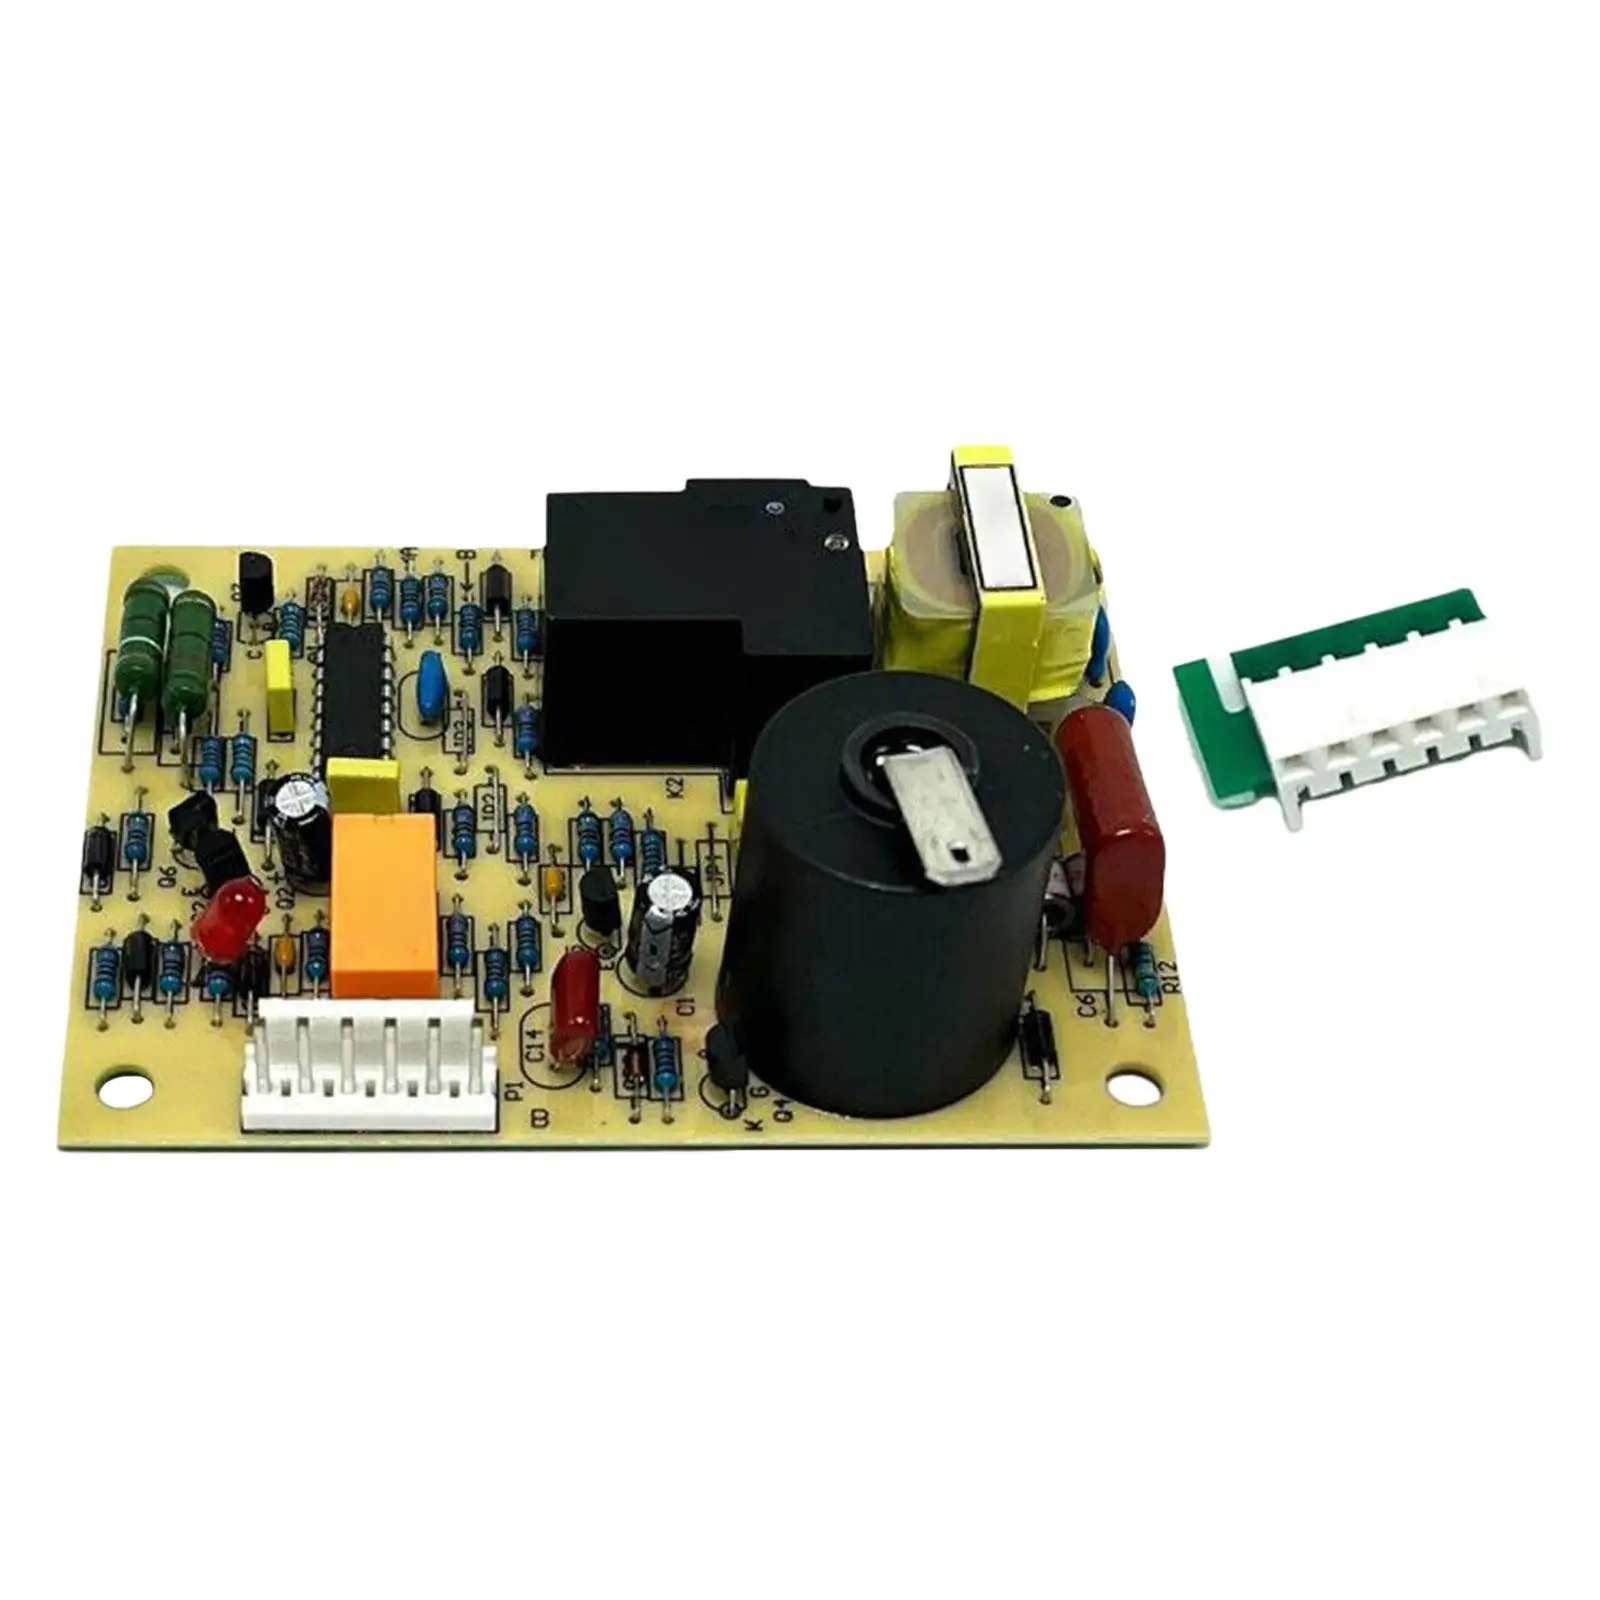 Ignition Control Circuit Board 31501 for 7912-ii Afmd25 DC82 25-32